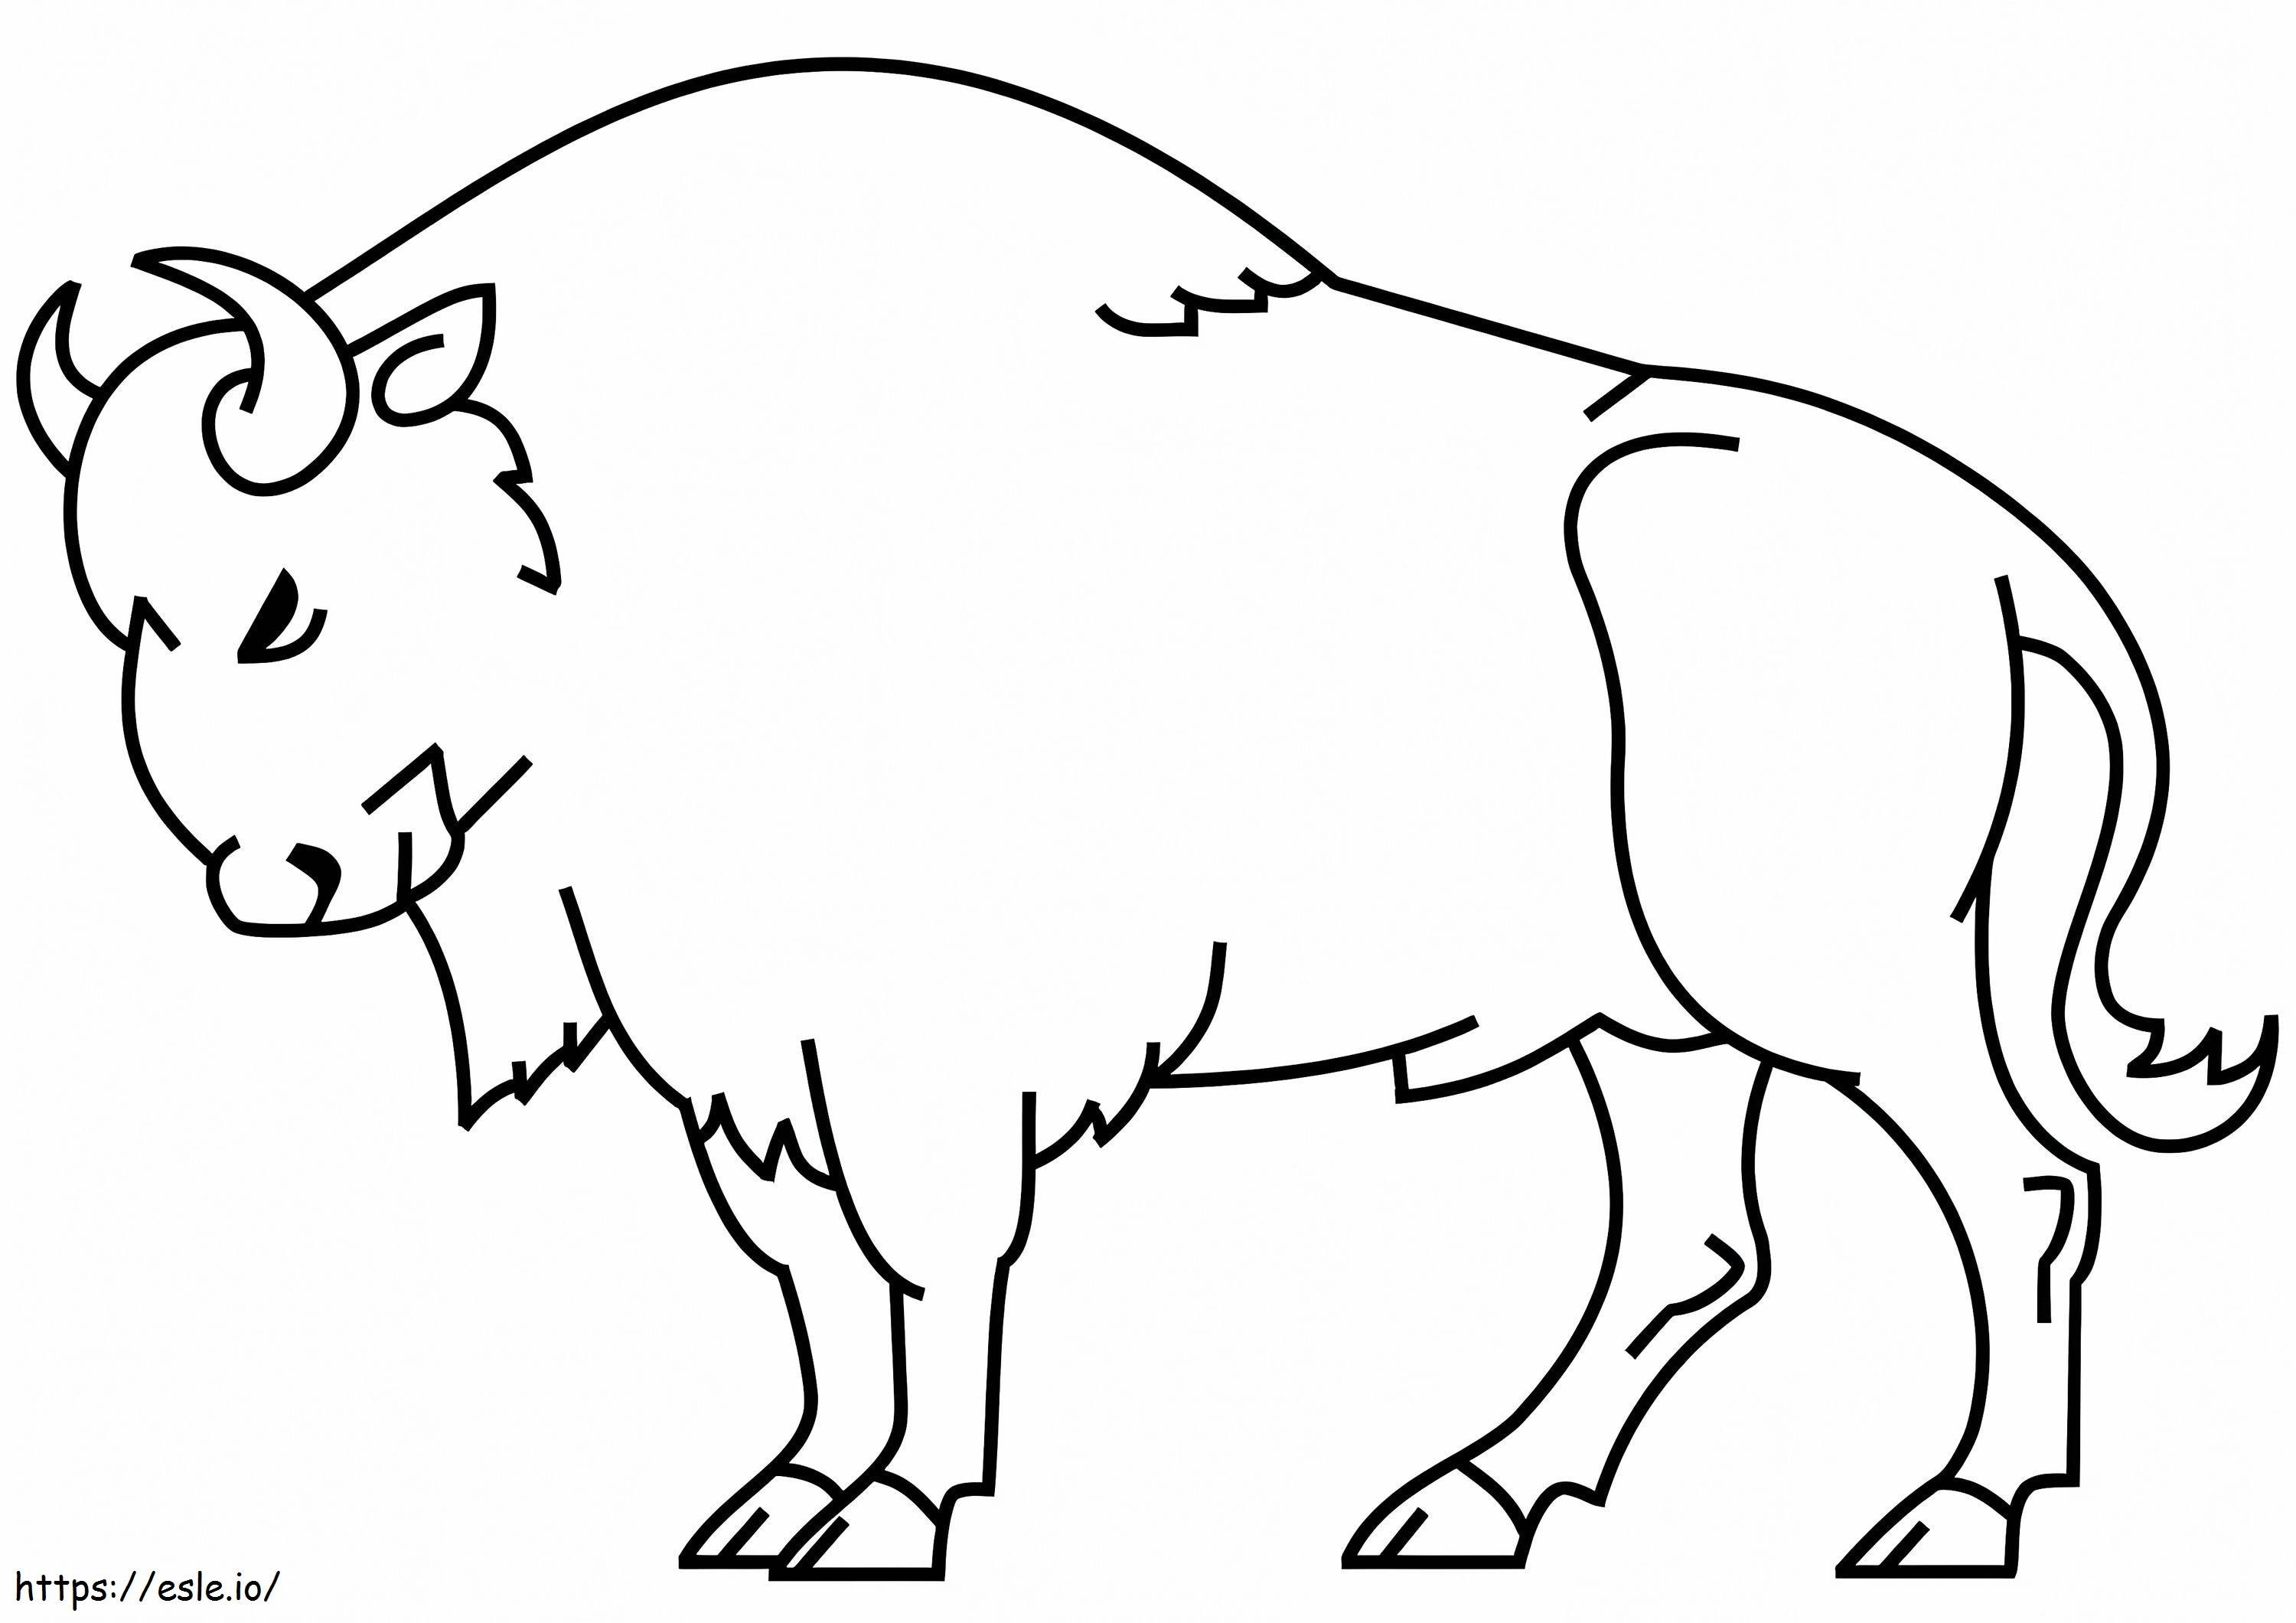 Simple Bison coloring page